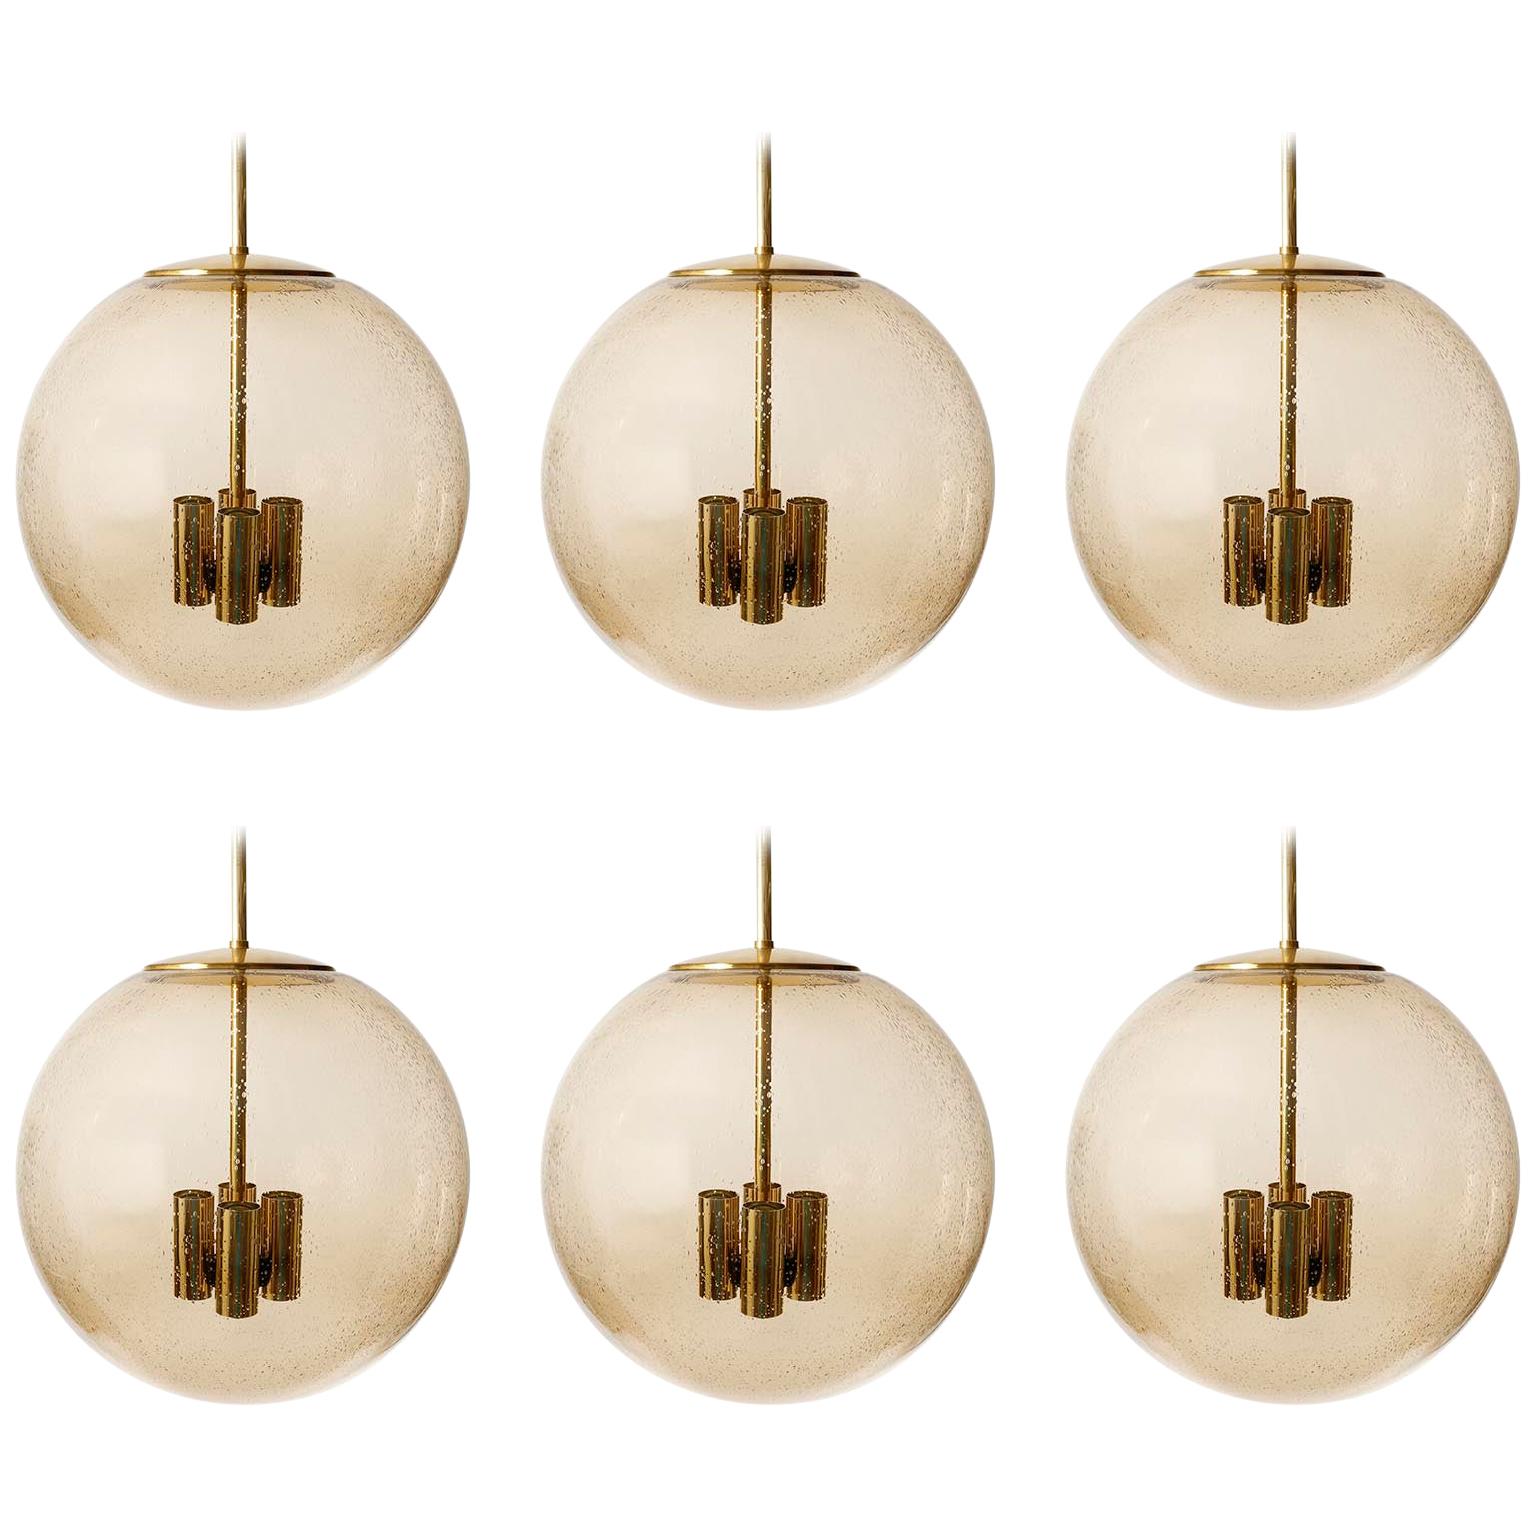 One of six extra large brass and hand blown glass globe pendants model 'P 197' by Glashütte Limburg, Germany, manufactured in midcentury, circa 1970.
The armature, rod and canopy are made of polished brass. The seeded glass globe with many air